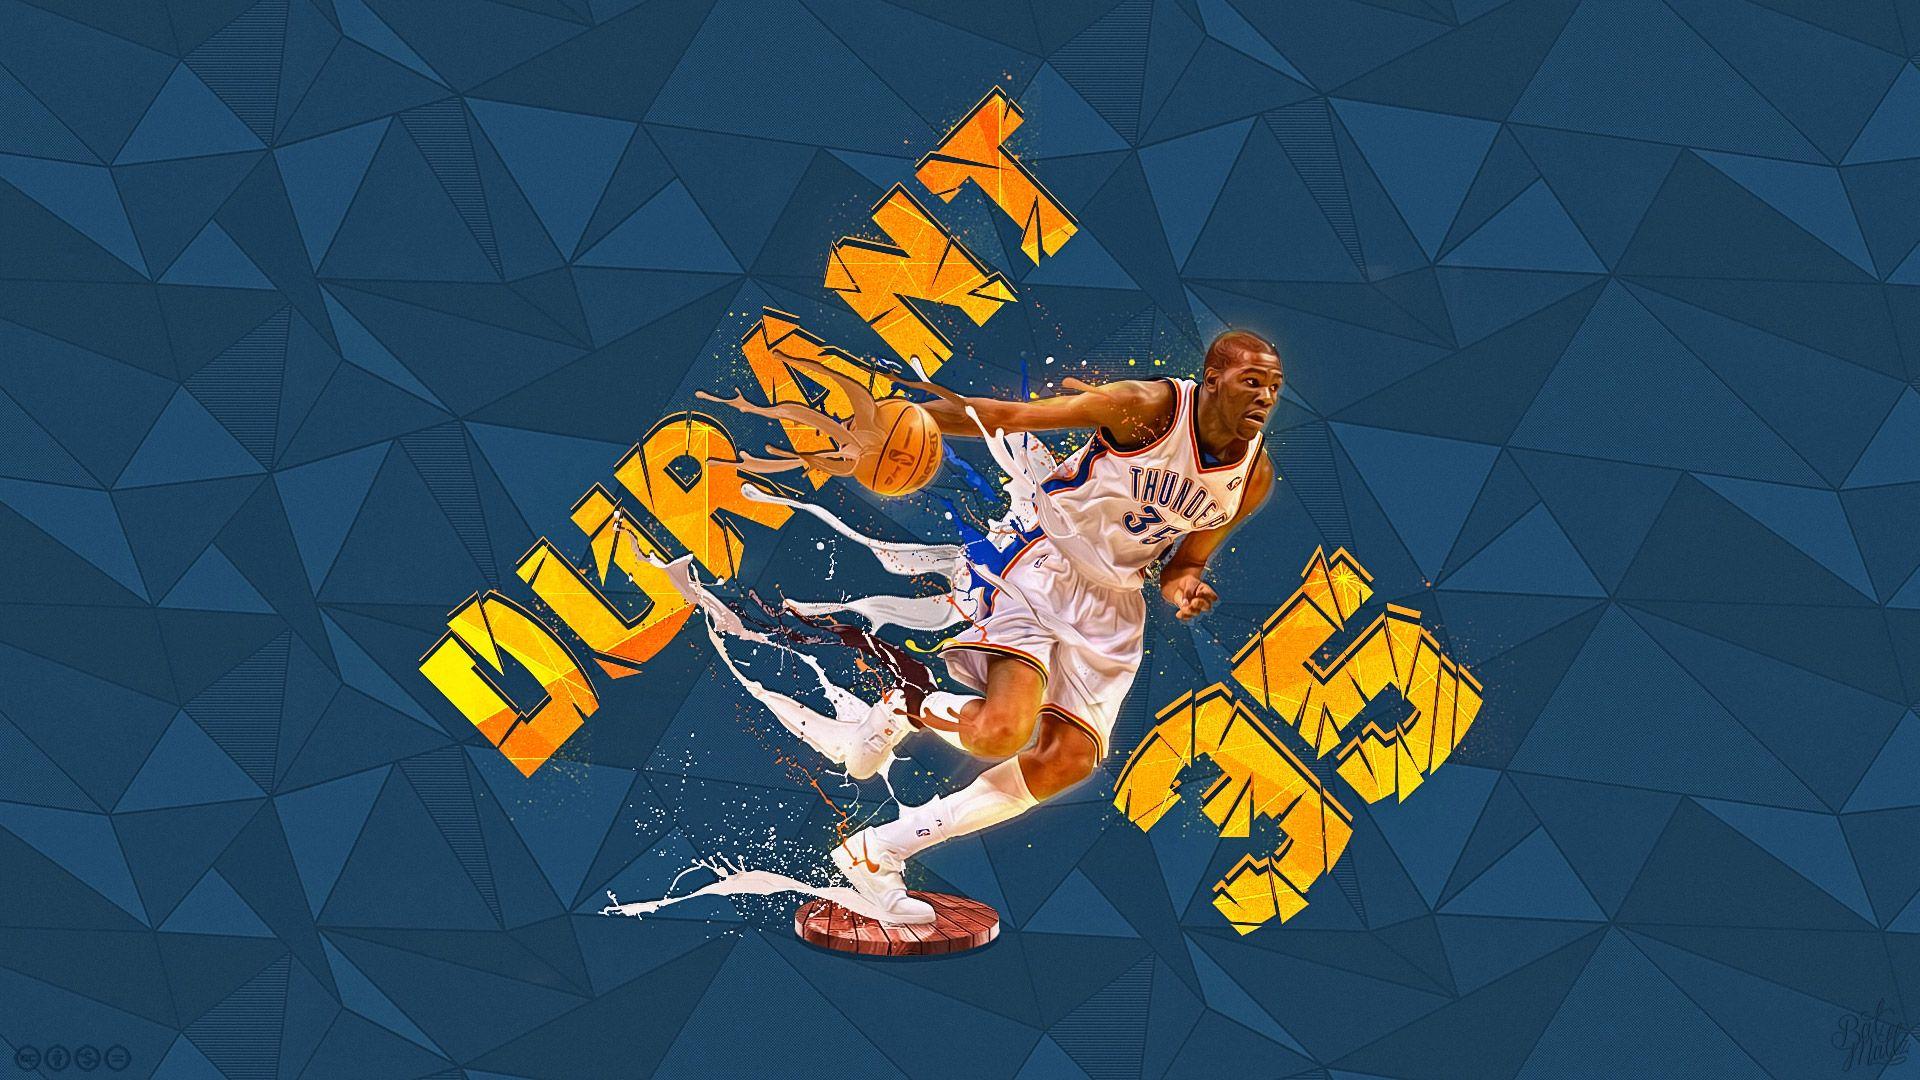 Cool Wallpaper Kd image picture. Free Download Wallpaper